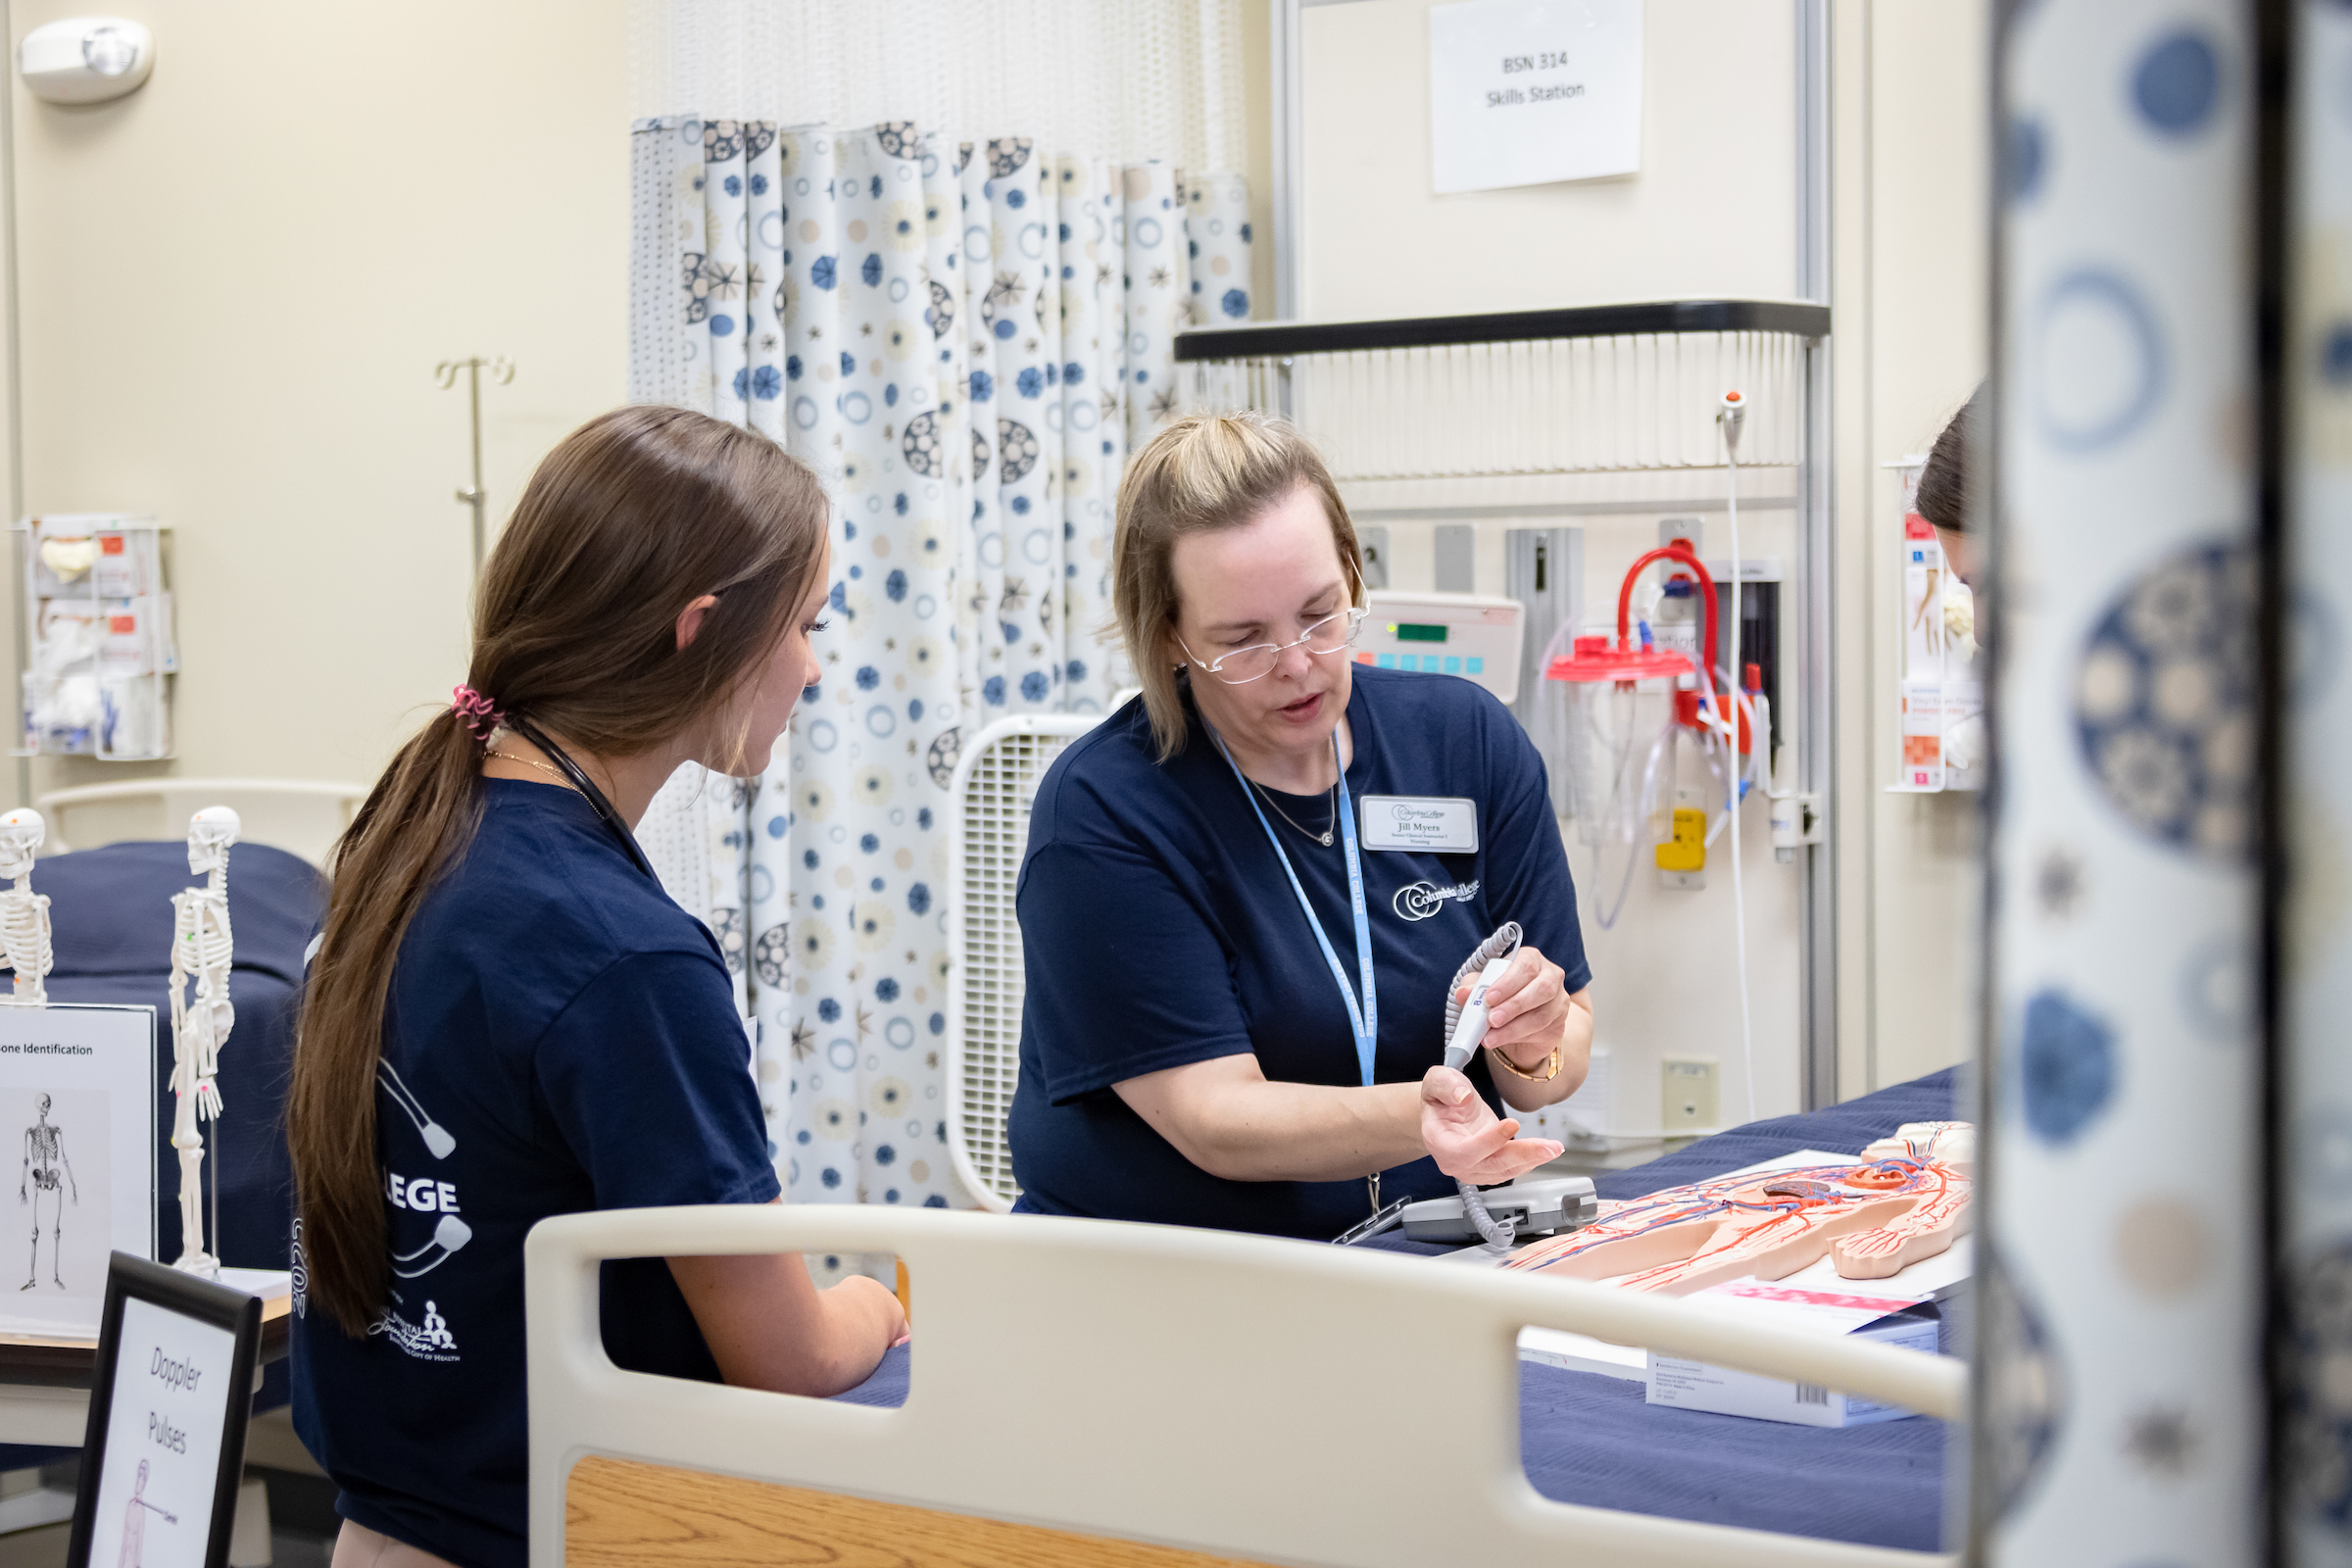 Two nursing students standing around a "patient" bed, one running tests while the other watches.